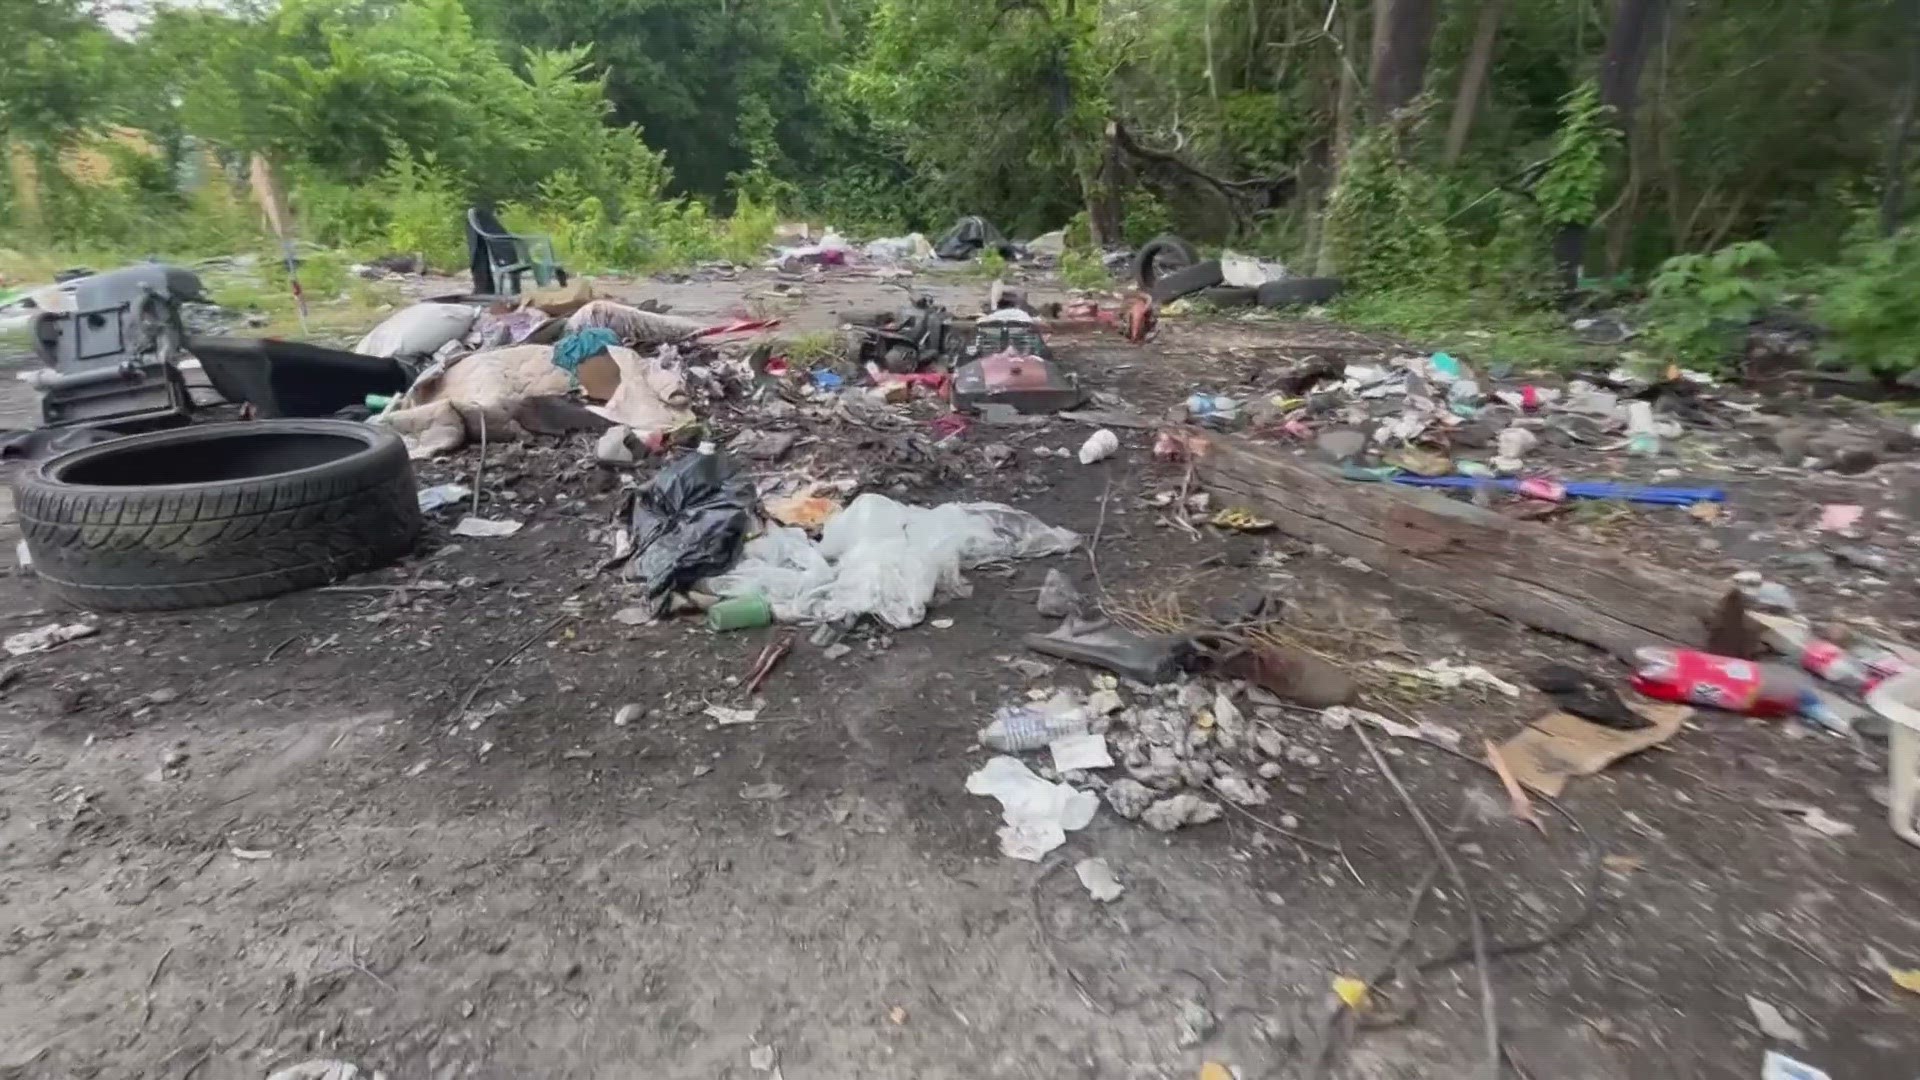 An investigation by the U.S. Justice Department into how the City of Houston responds to illegal dumping complaints has been settled.